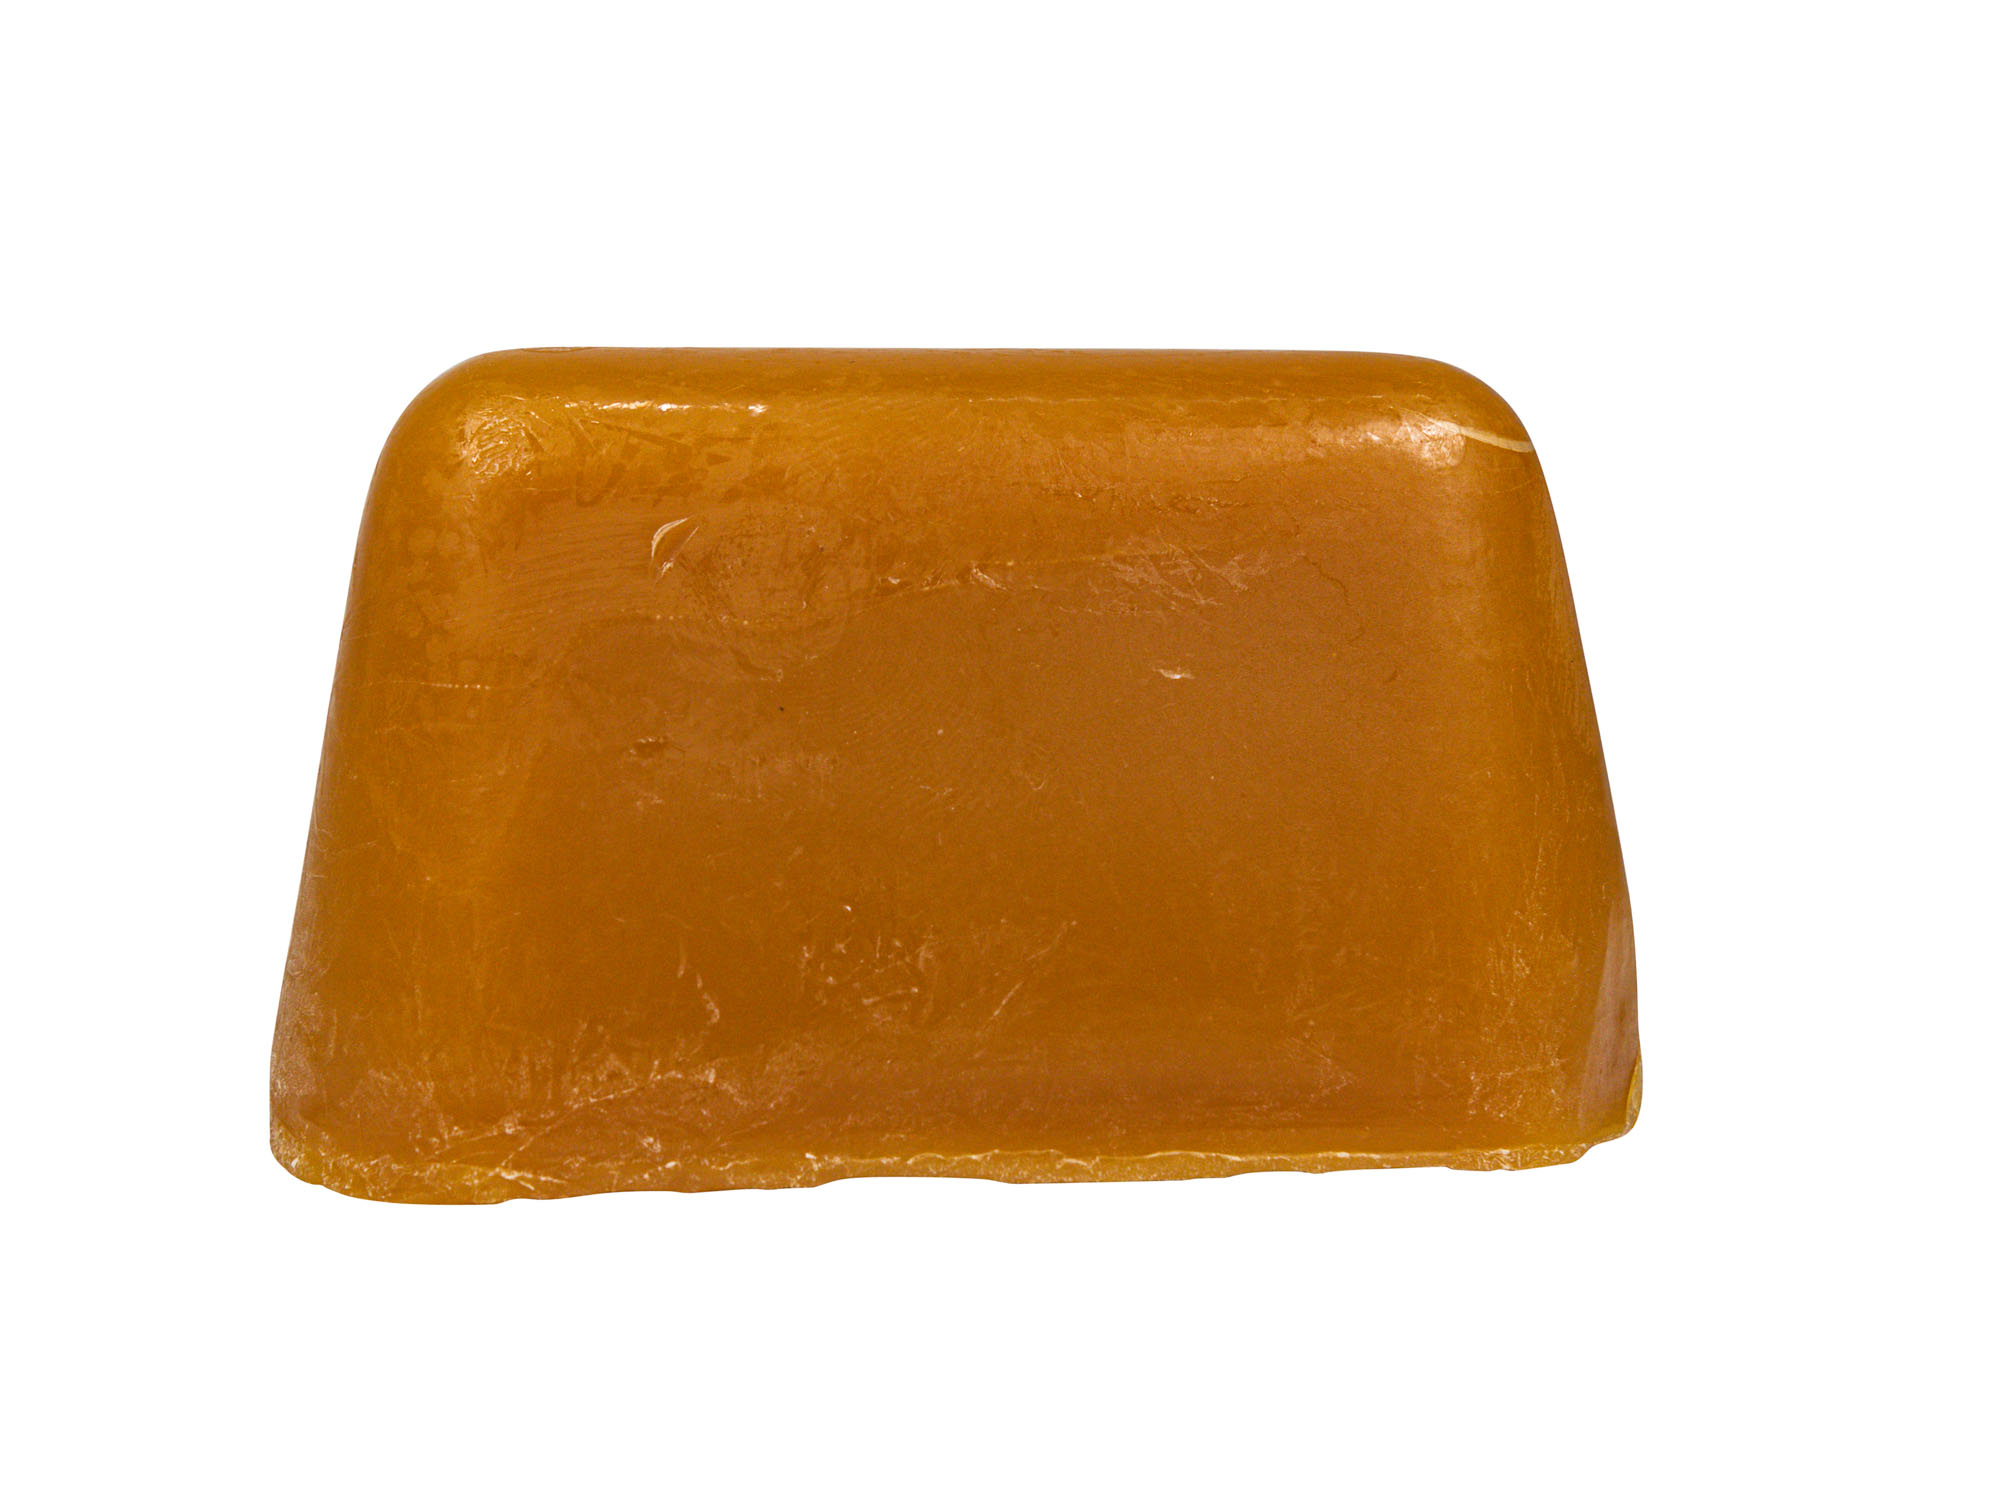 Beeswax Block: USA Triple Filtered (lb)